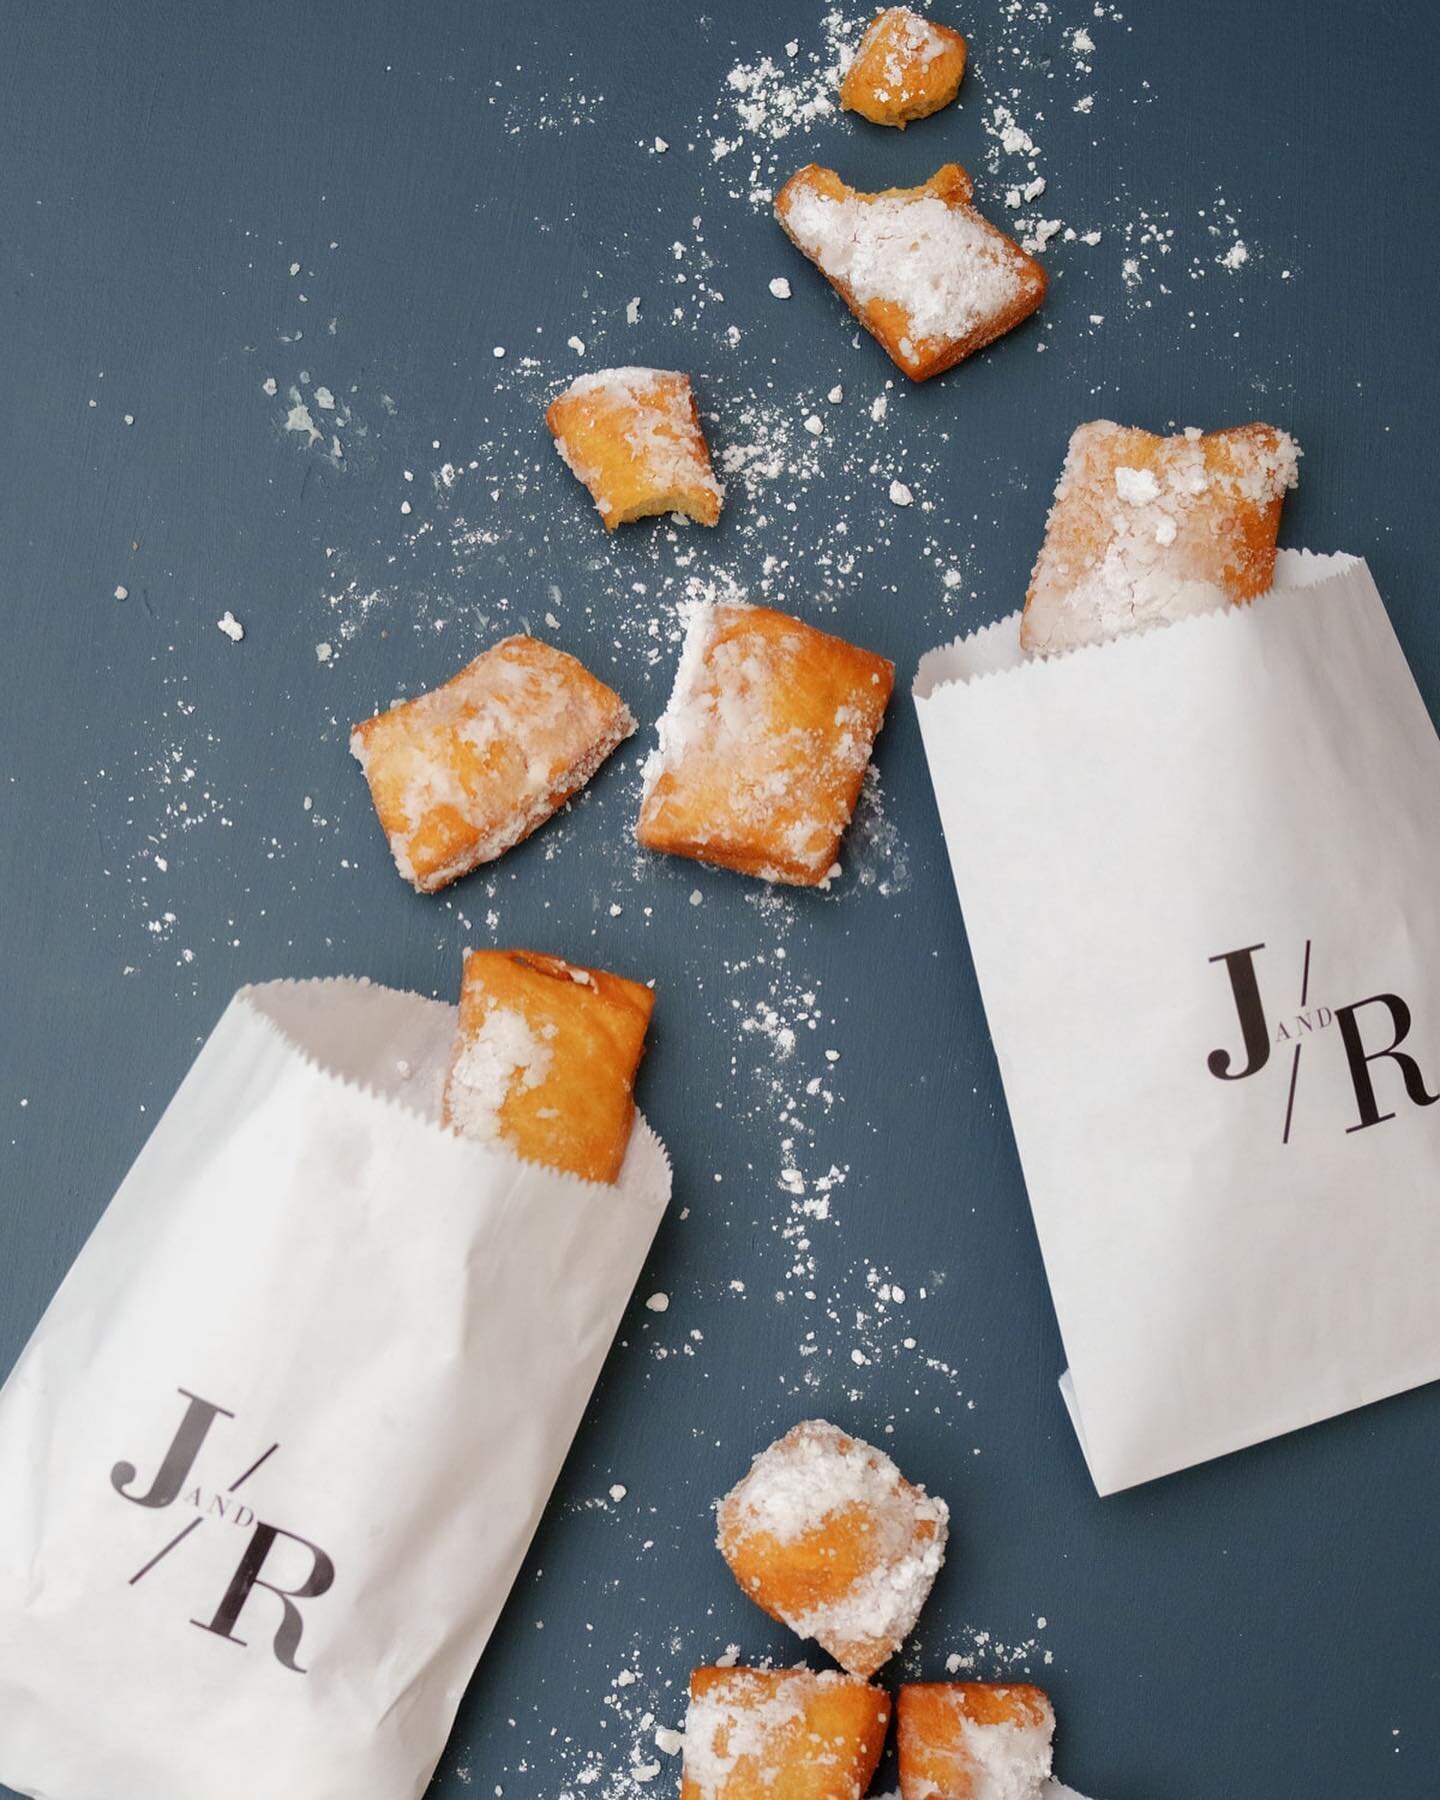 When your grooms are from the south, beignets are a MUST!

Planner &amp; Designer: @shannonroseevents
Photographer: @rachelelainephoto
Venue: @themasondallas
Florist: @olivegrovedesign
Band: @jordankahnorchestra
Catering: @bluefiretotalcatering @the_